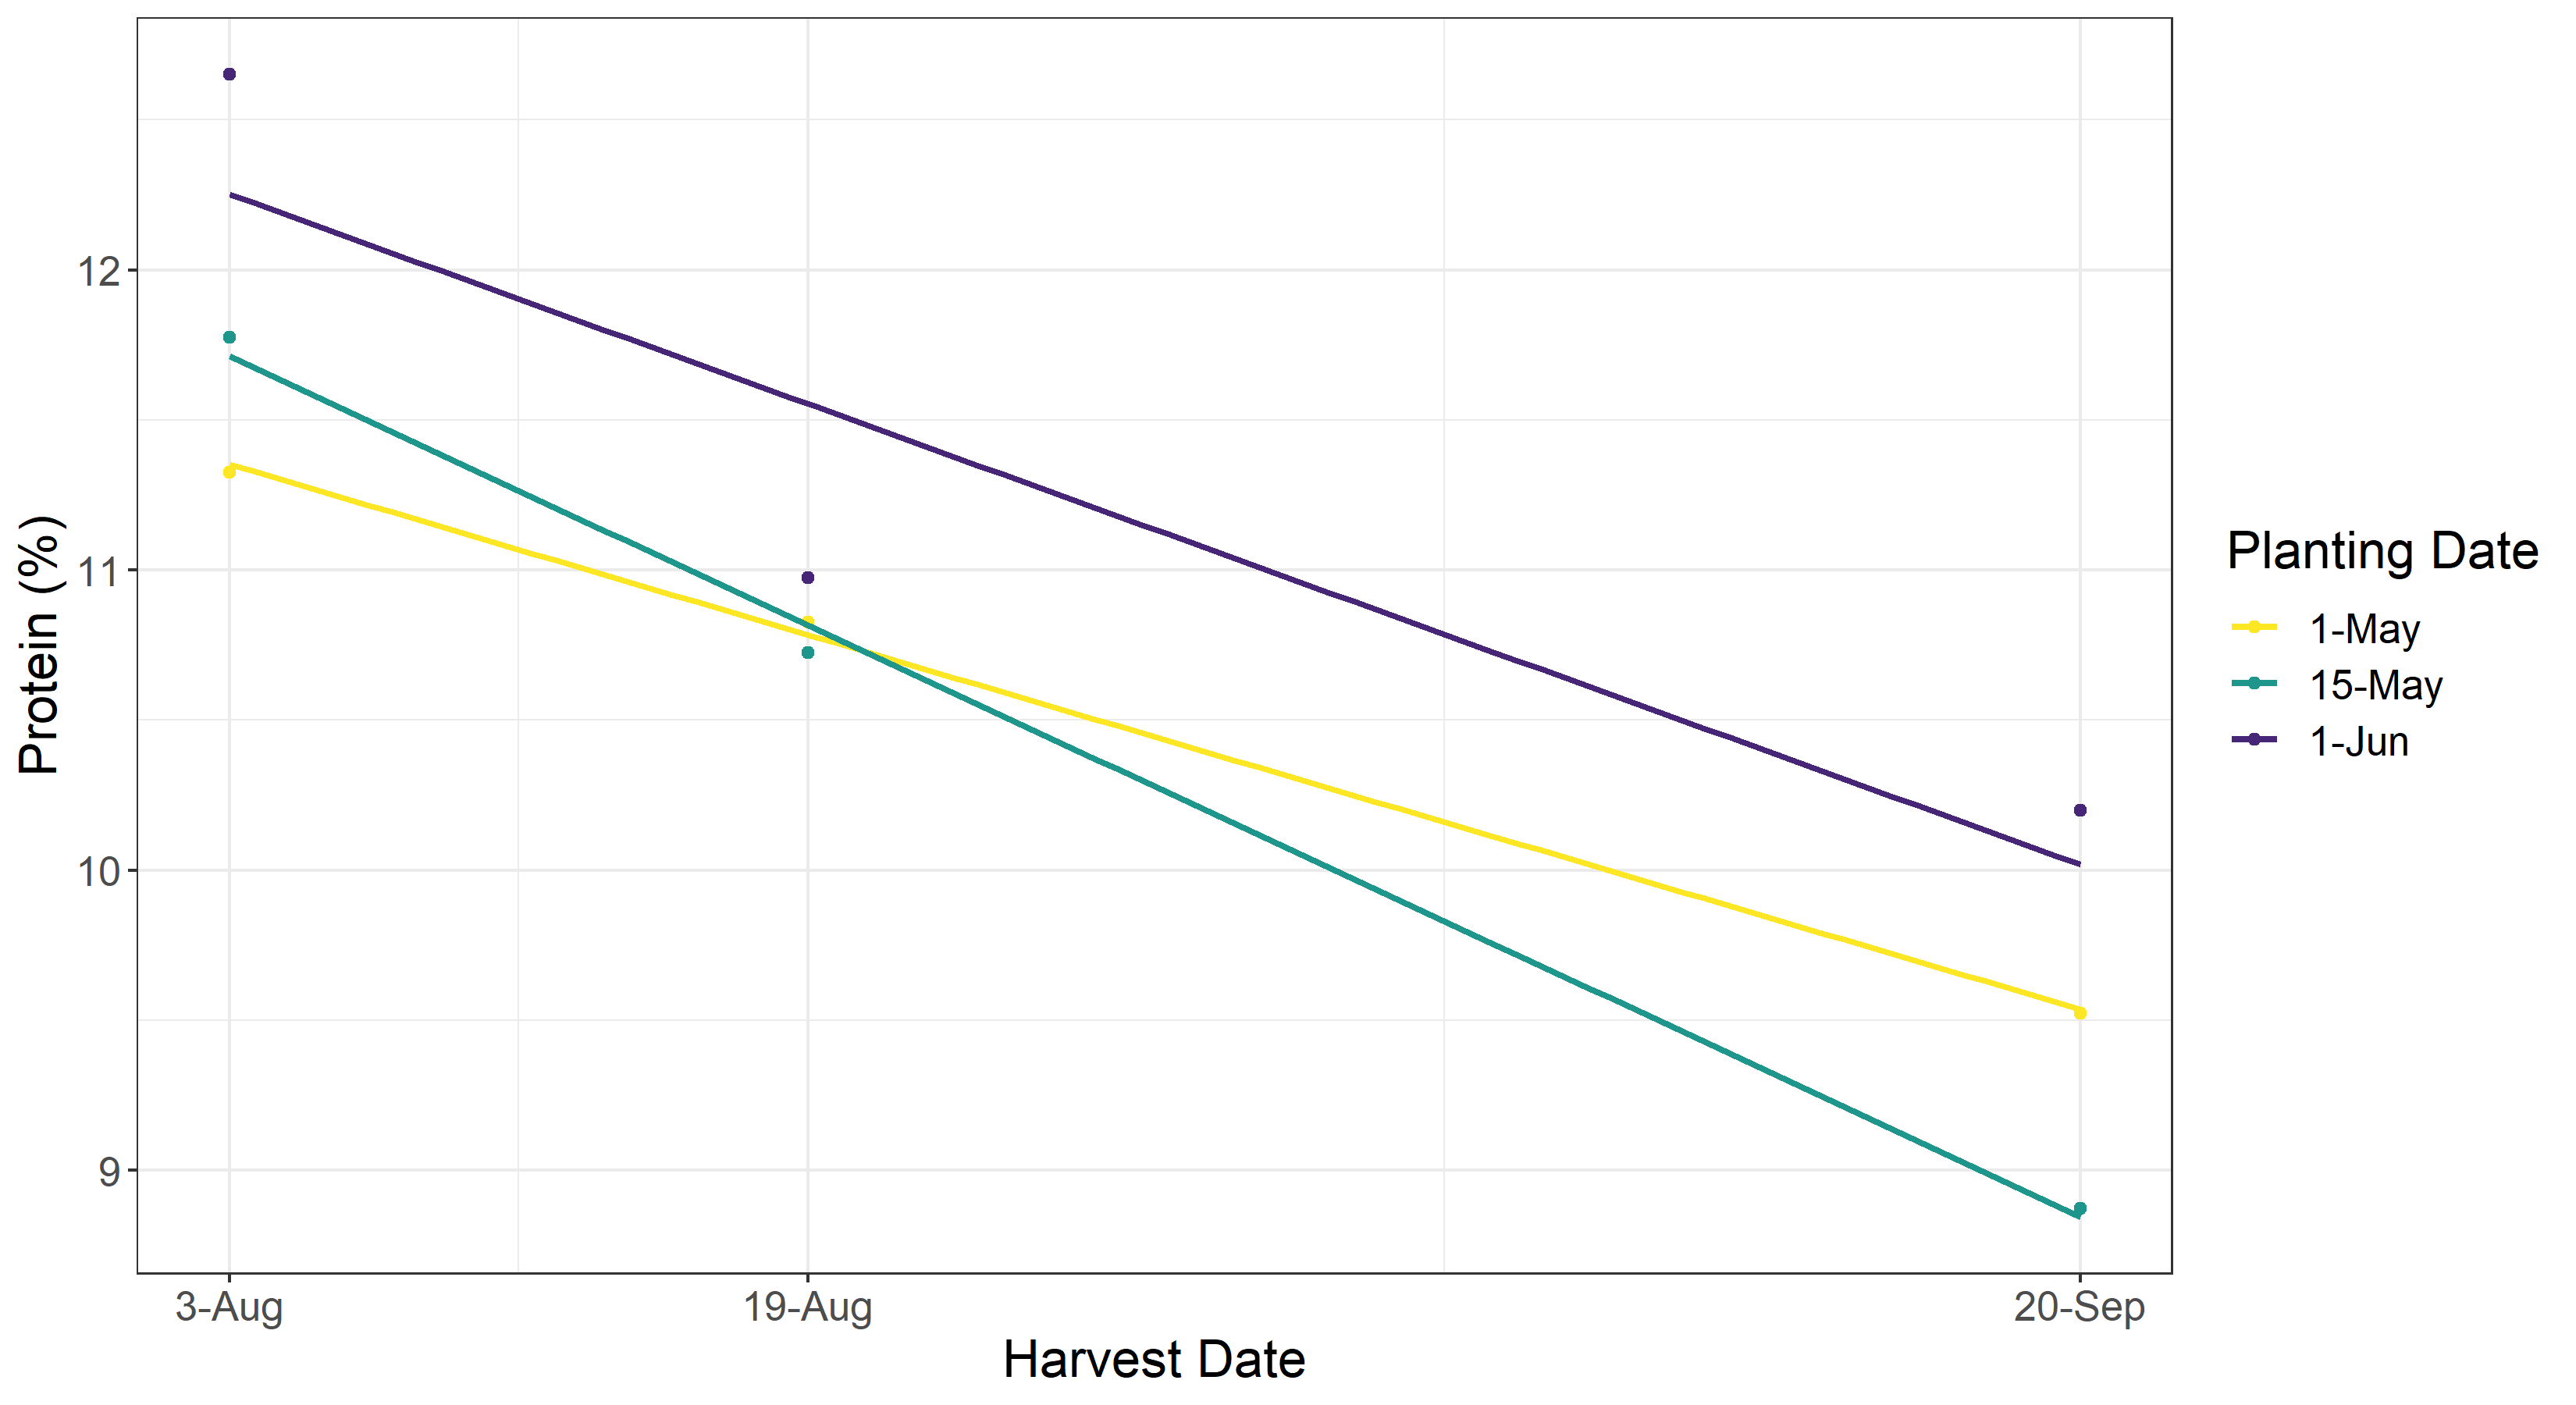 Linear model showing the protein percentage based on planting date over the harvest date